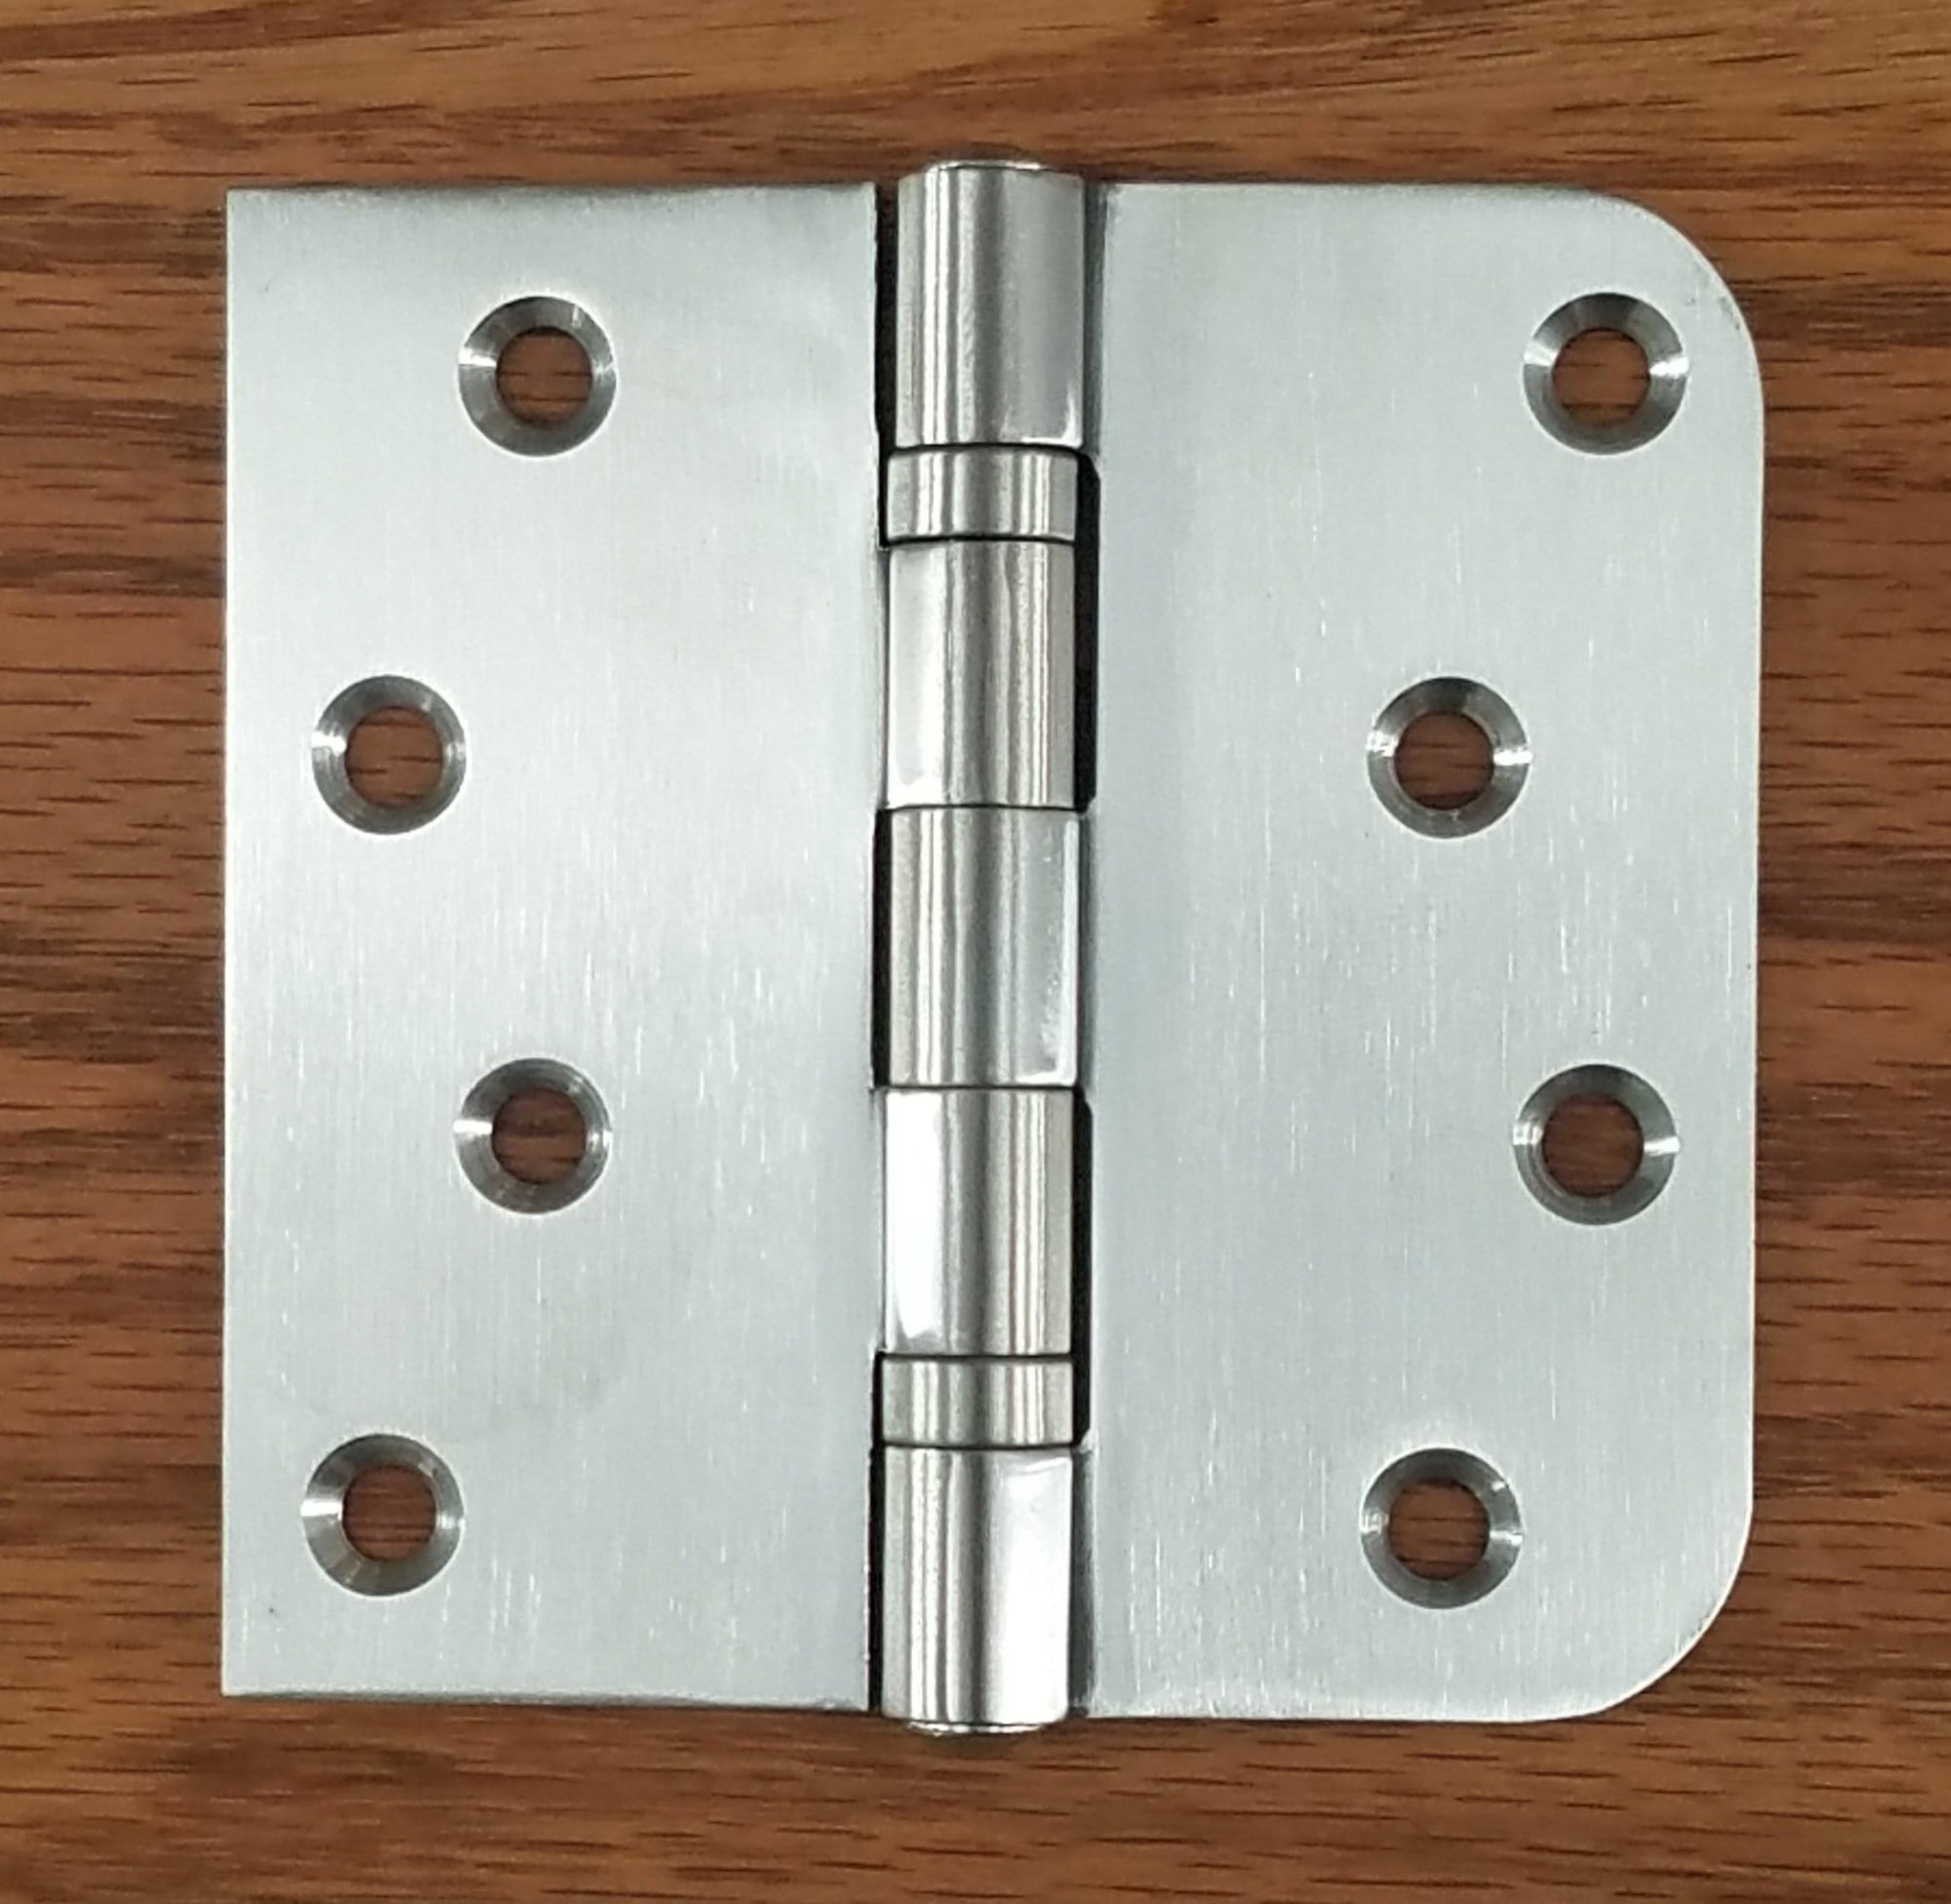 Stainless Steel Ball Bearing Security Hinges - 4" With 5/8" Radius Square - Non-Removable Riveted Pin - 3 Pack